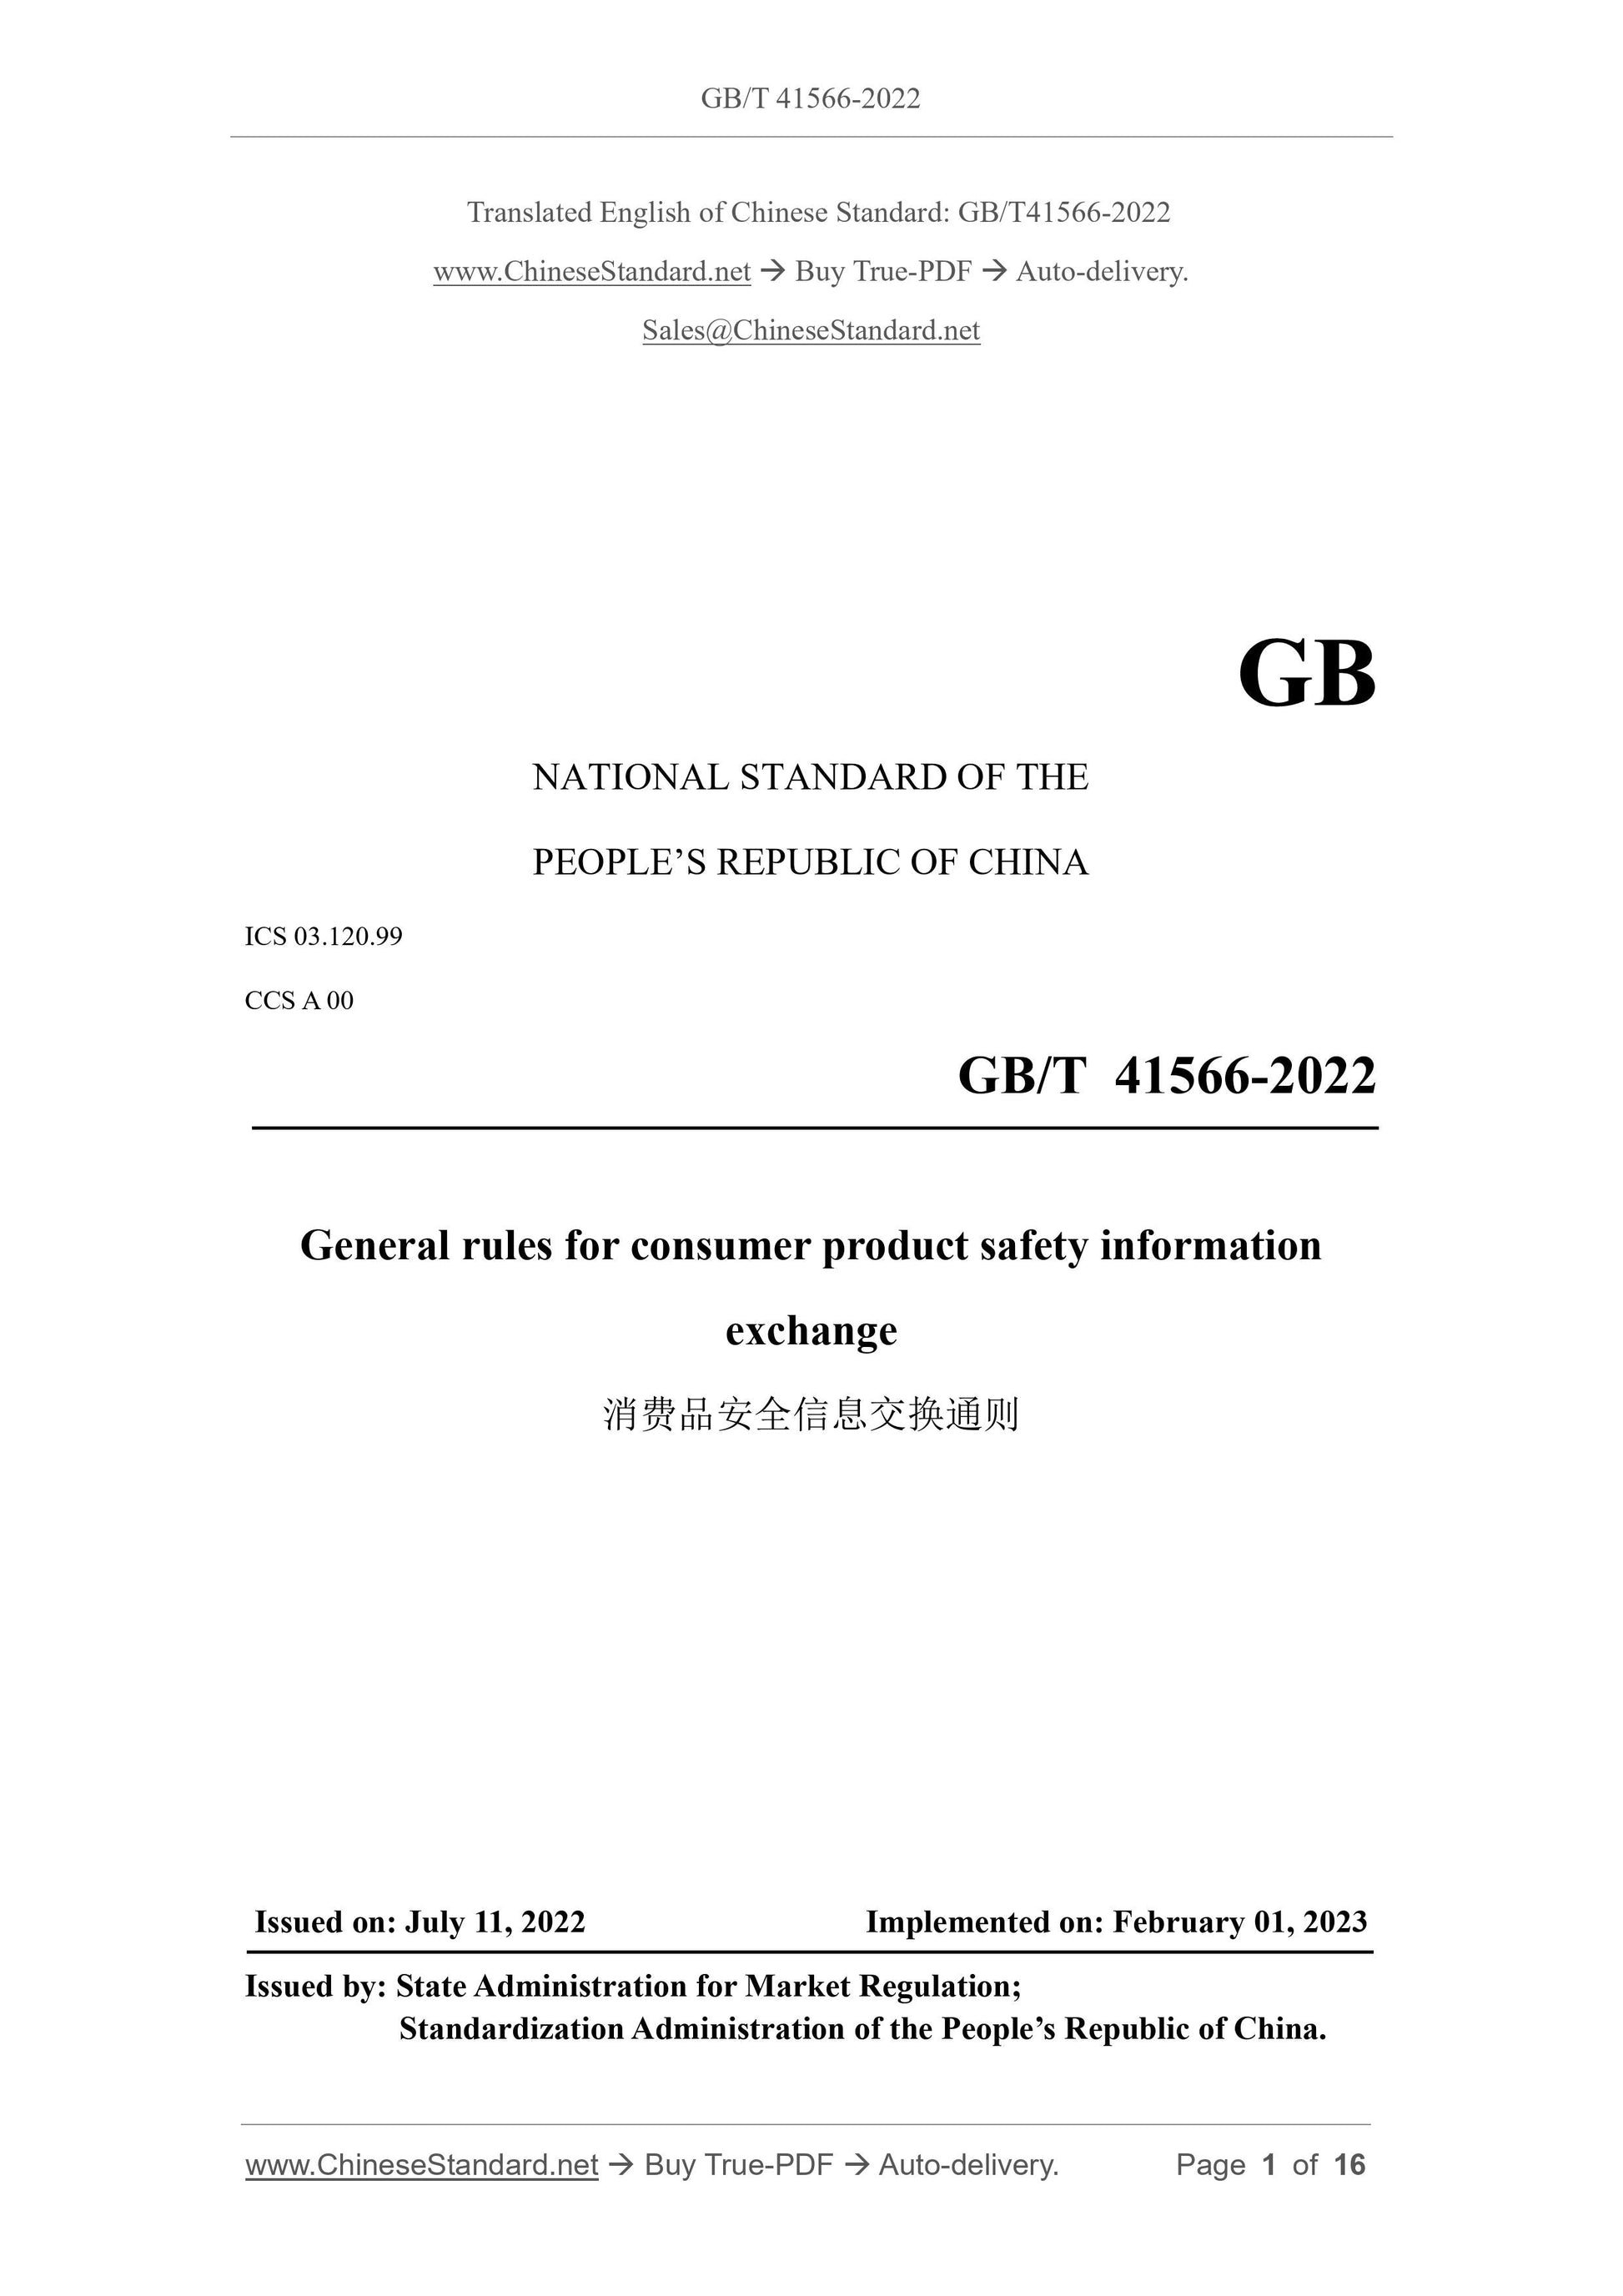 GB/T 41566-2022 Page 1